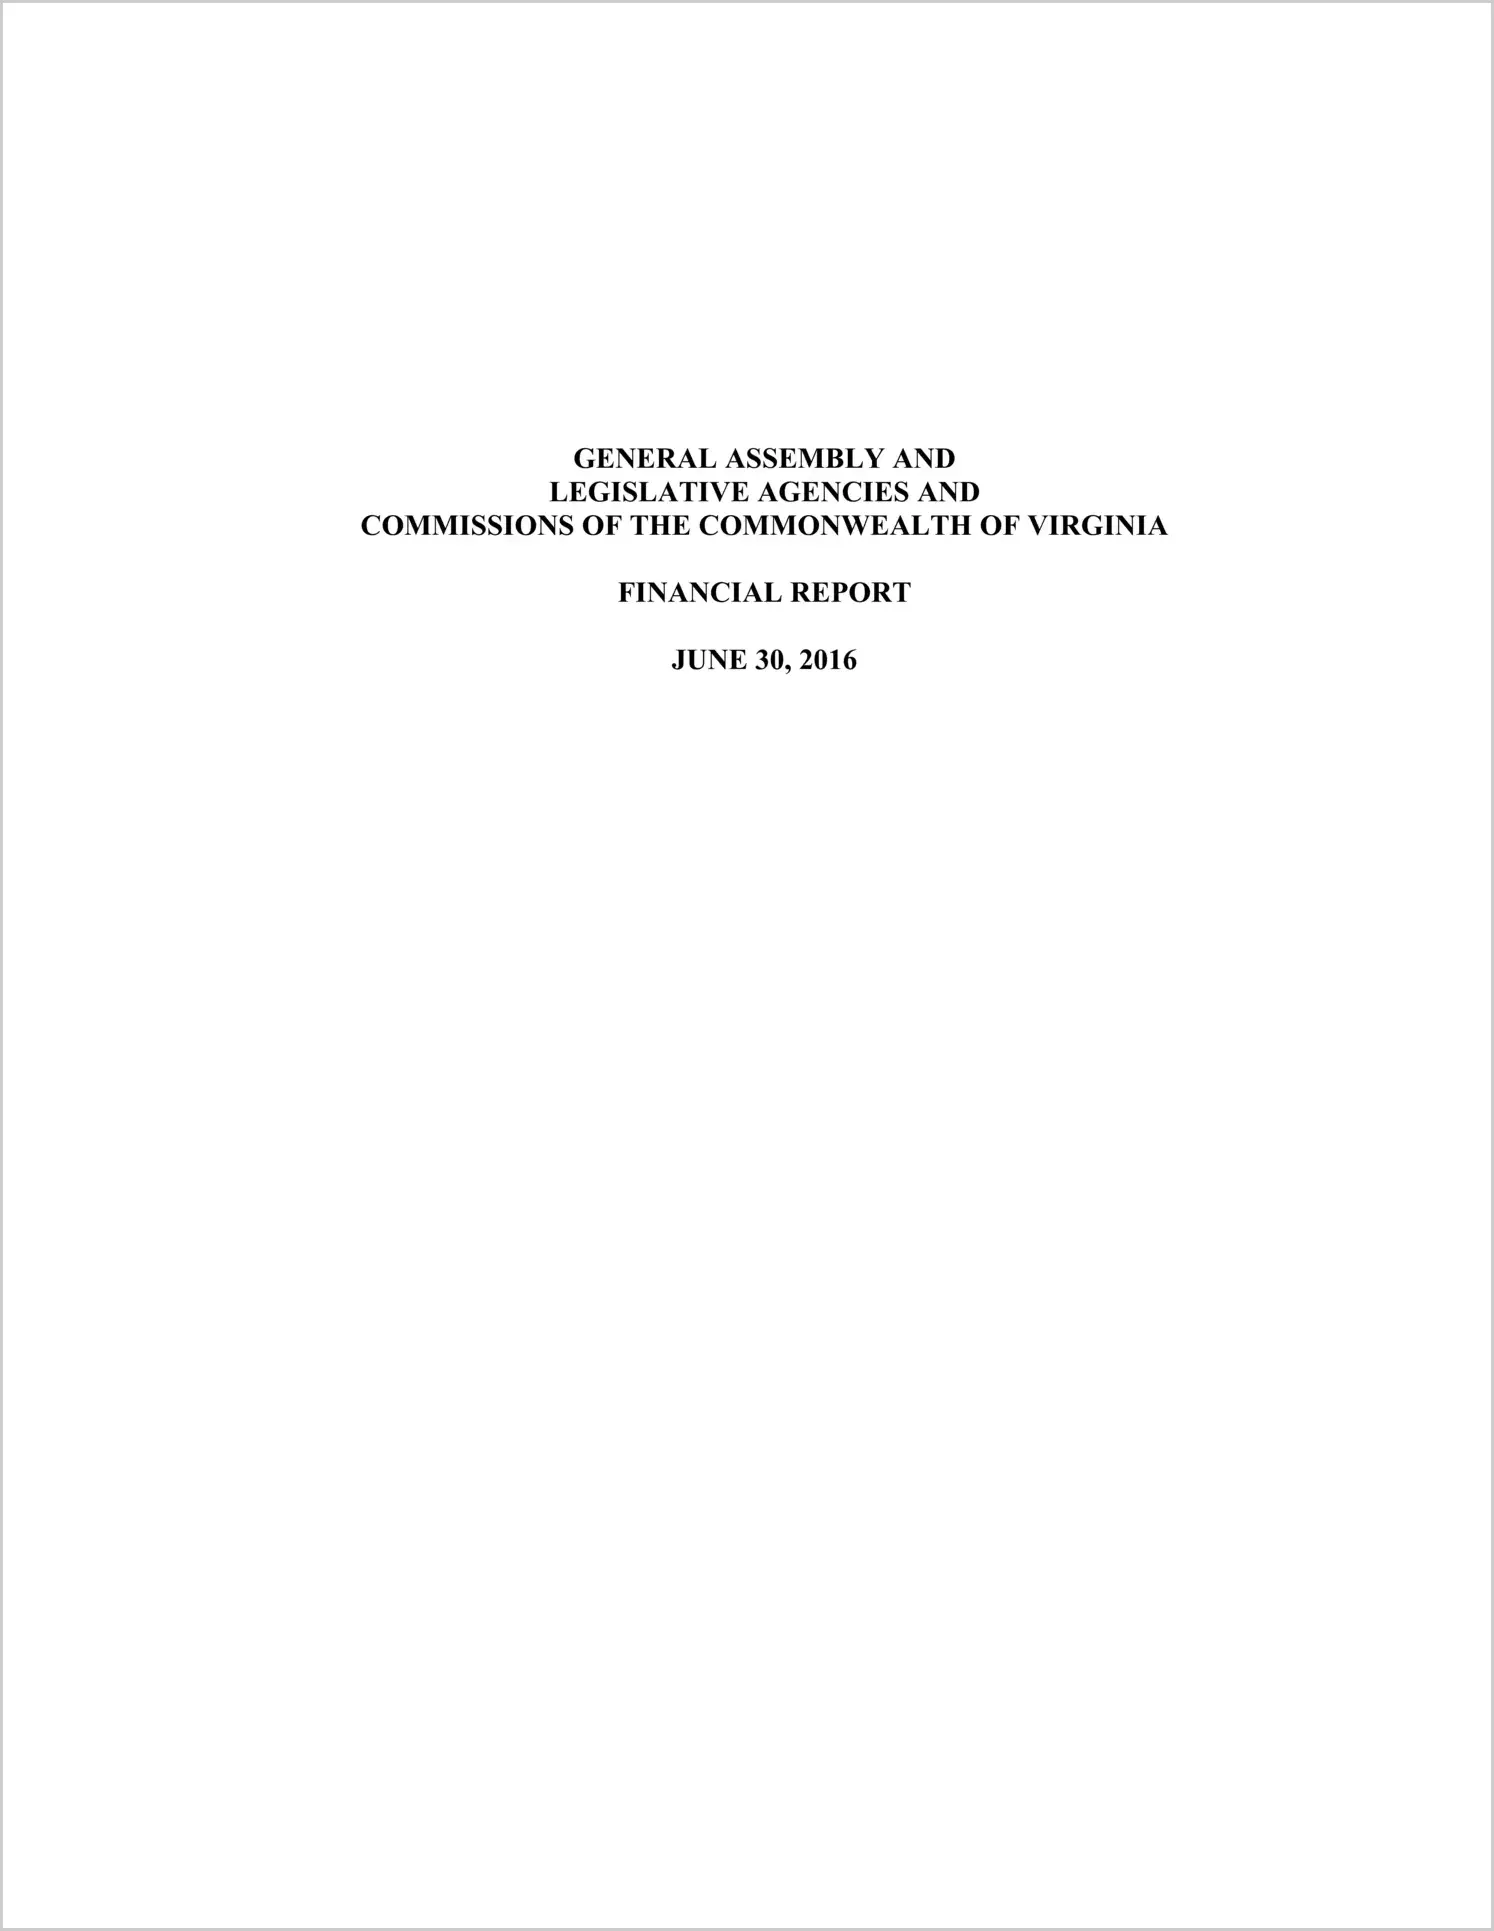 General Assembly and Legislative Agencies and Commissions of the Commonwealth of Virginia Financial Report for the Fiscal Year ended June 30, 2016